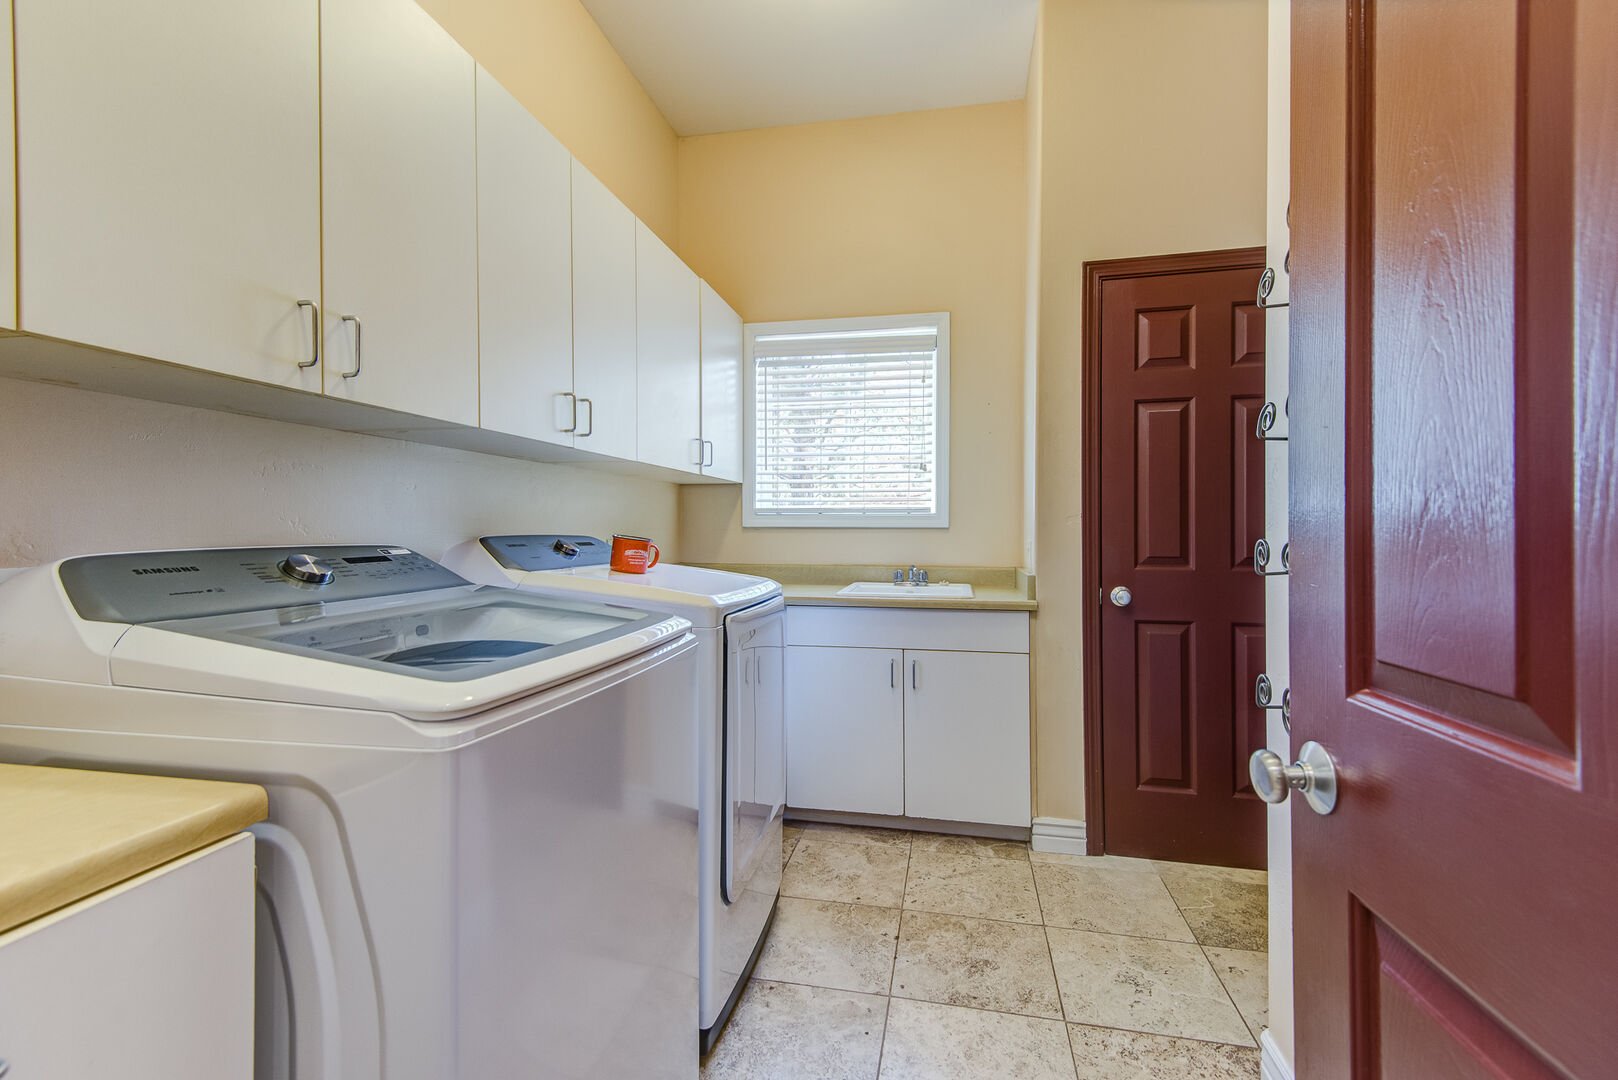 Laundry Room with Full-size Washer and Dryer